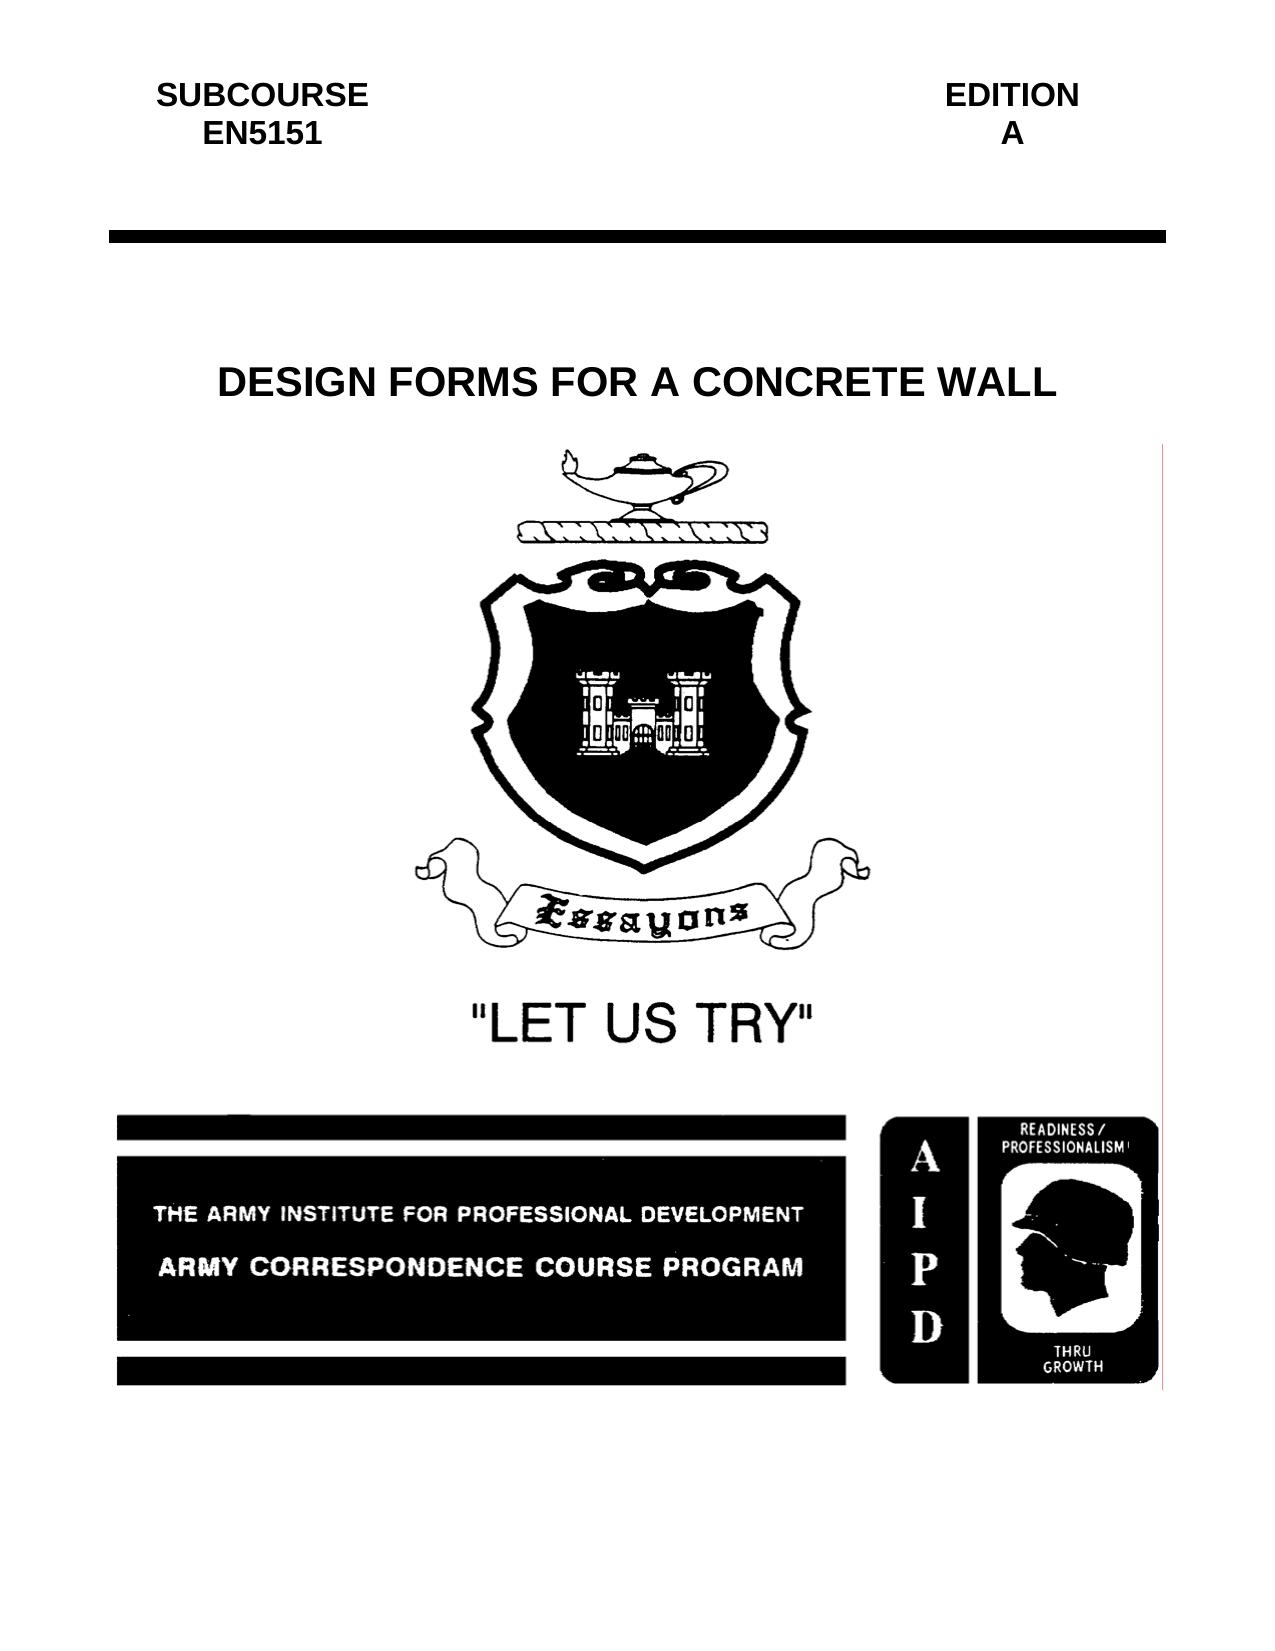 Microsoft Word - Design Forms for a Concrete Wall - en5151a.doc